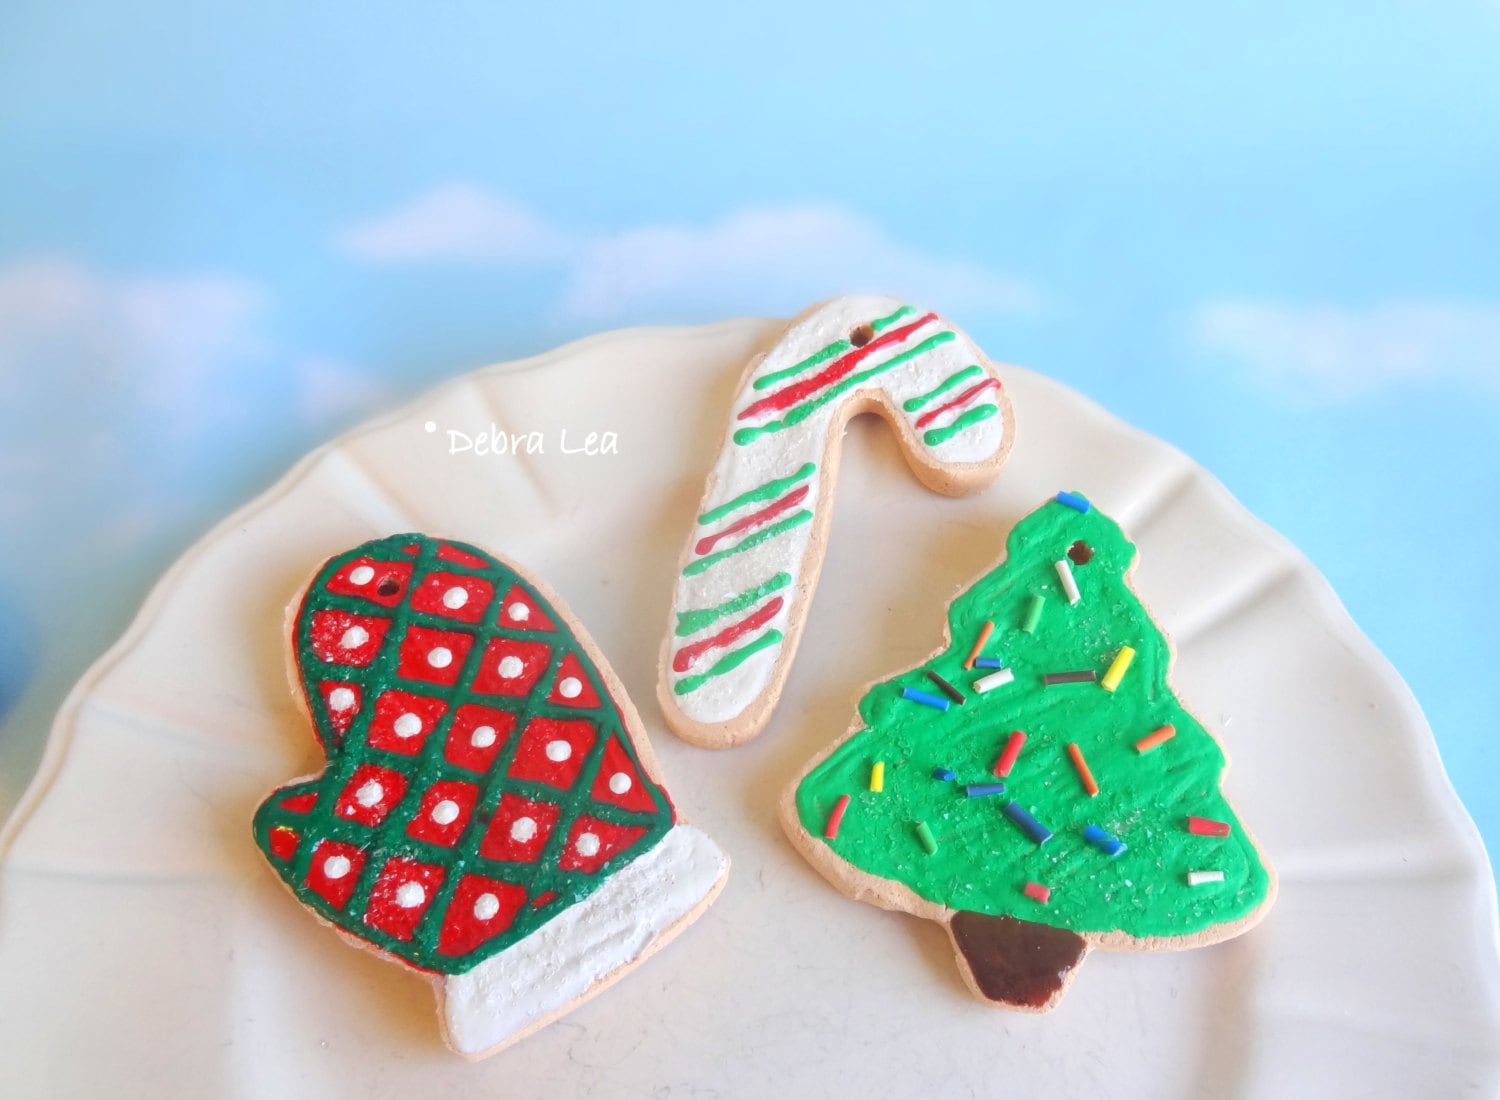 Fake Cookies Set of 3 Handmade Faux Christmas Holiday Gingerbread Sugar Cookie Ornament Mitten Candy Cane Peppermint Tree Sprinkles C10